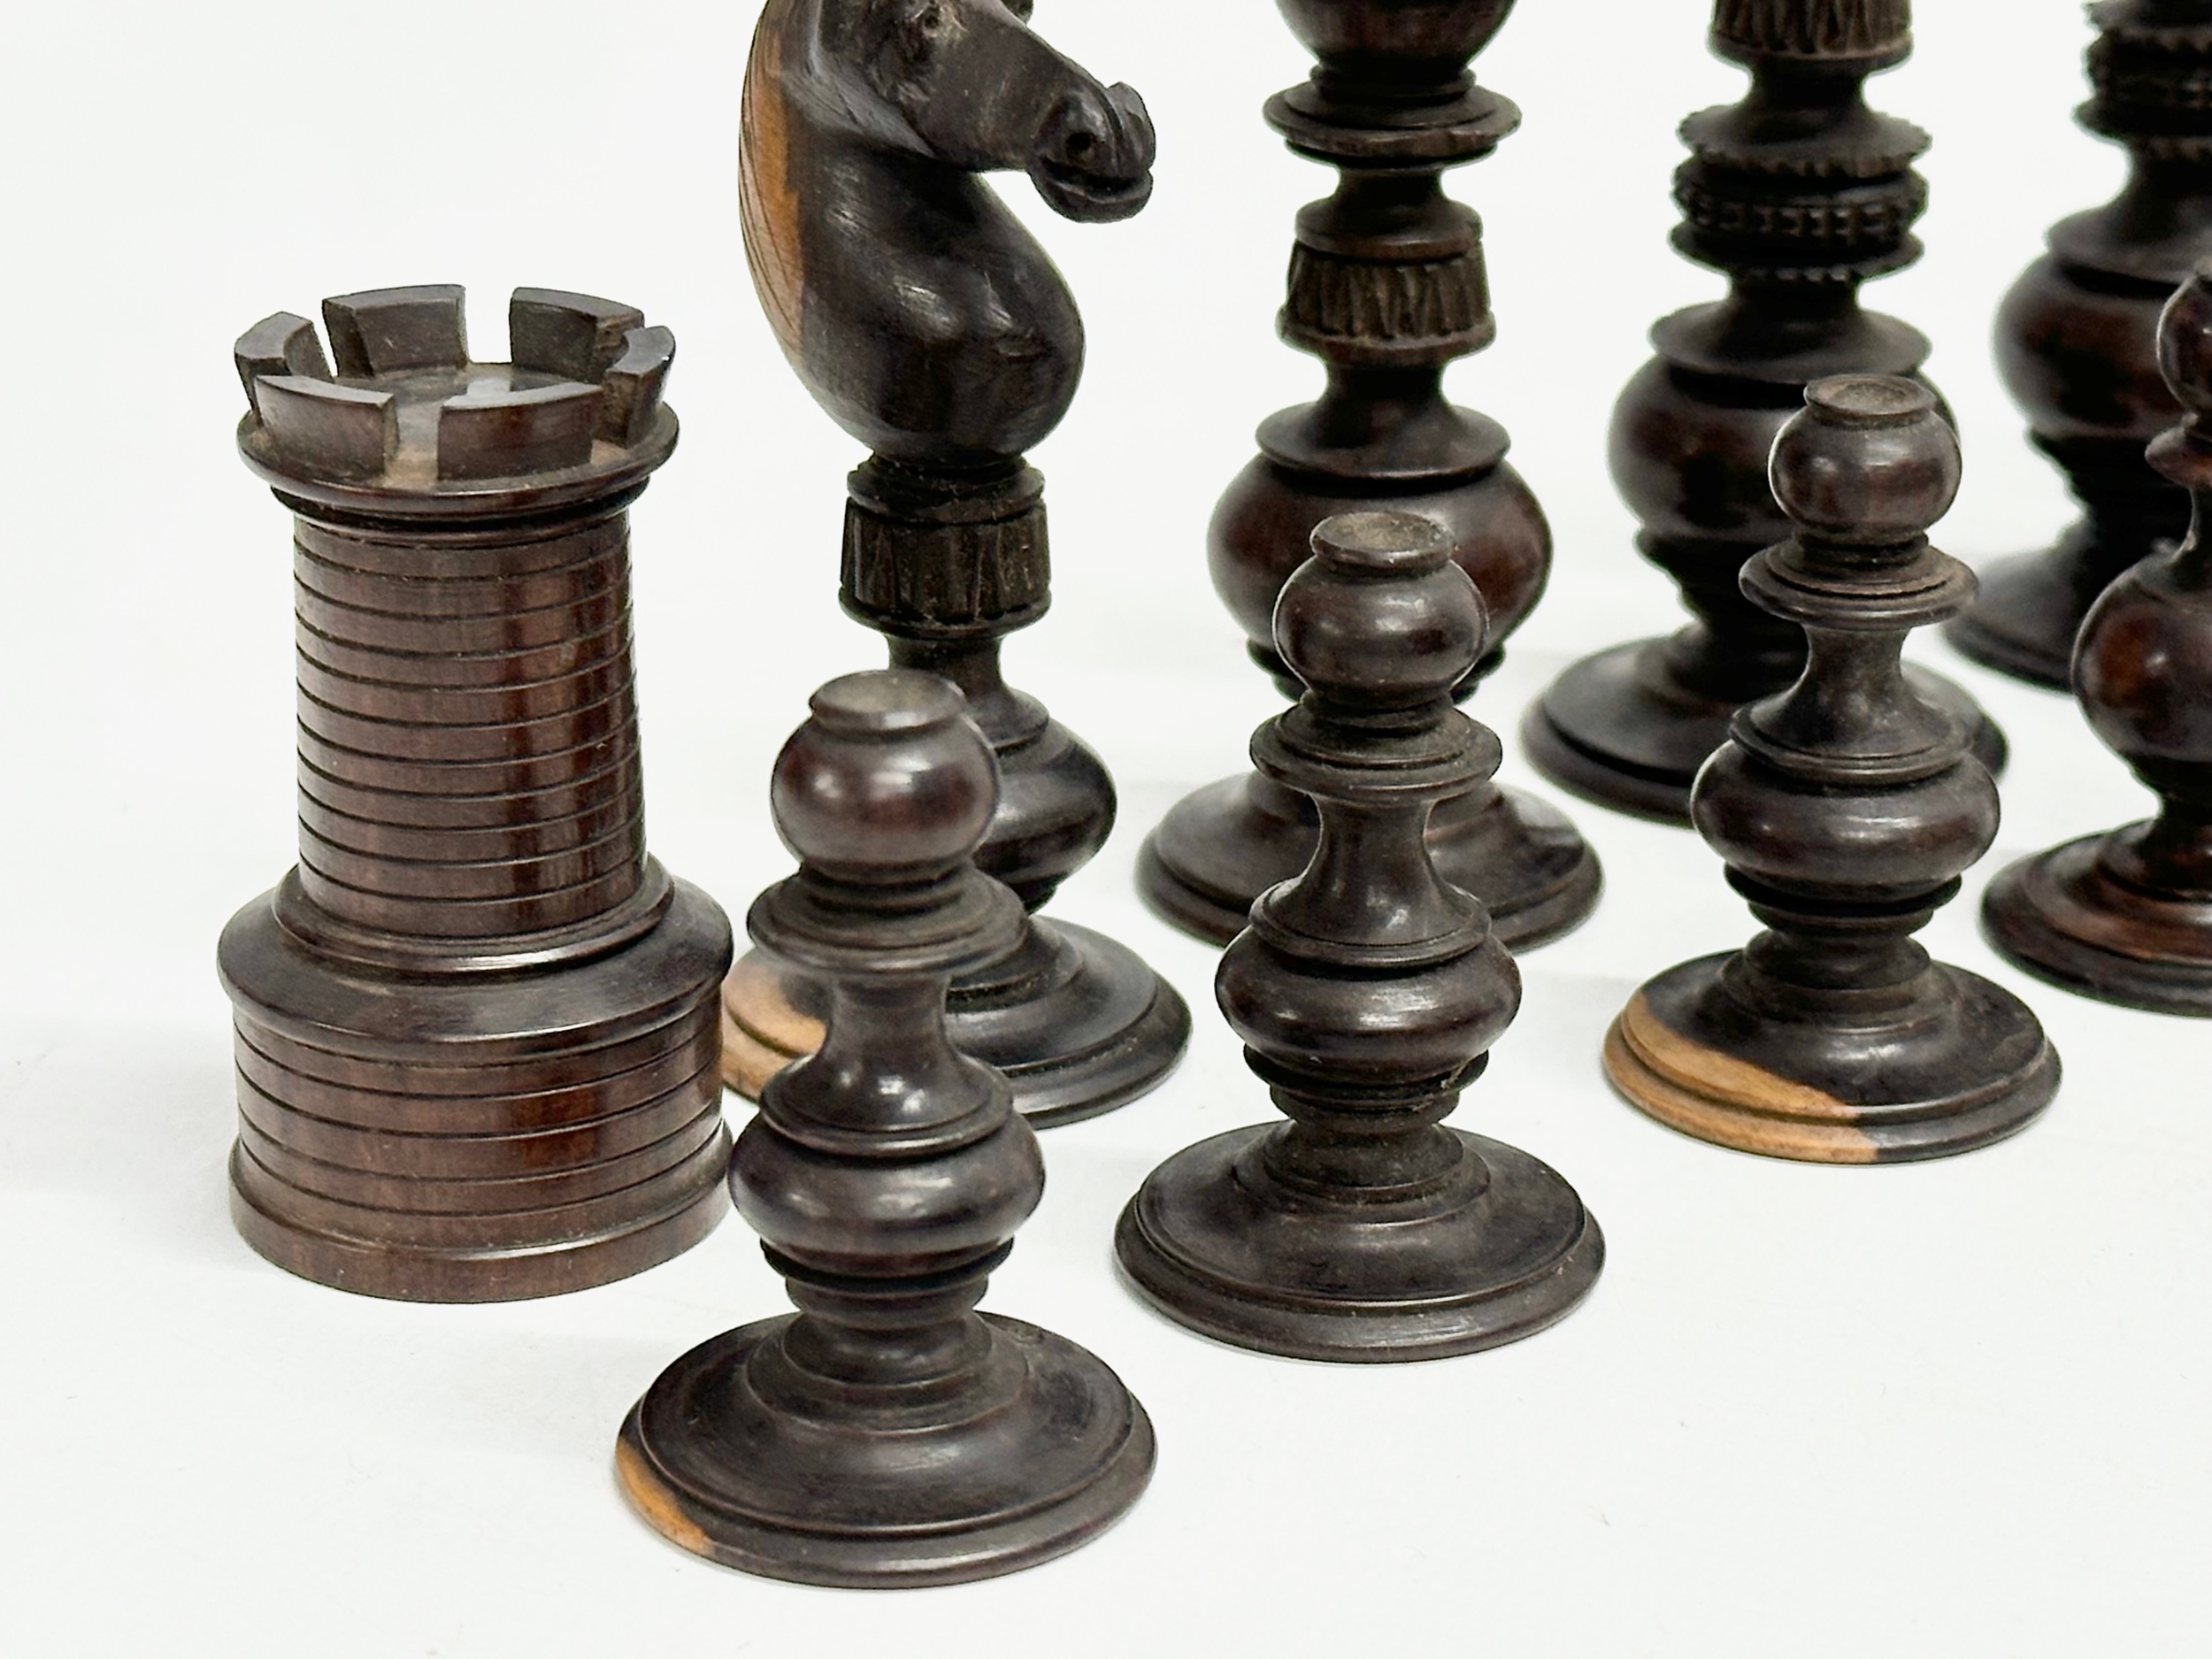 Good quality 19th Century chess pieces in the style of the Holy Land Crusade, Islamic vs Christian - Image 2 of 17